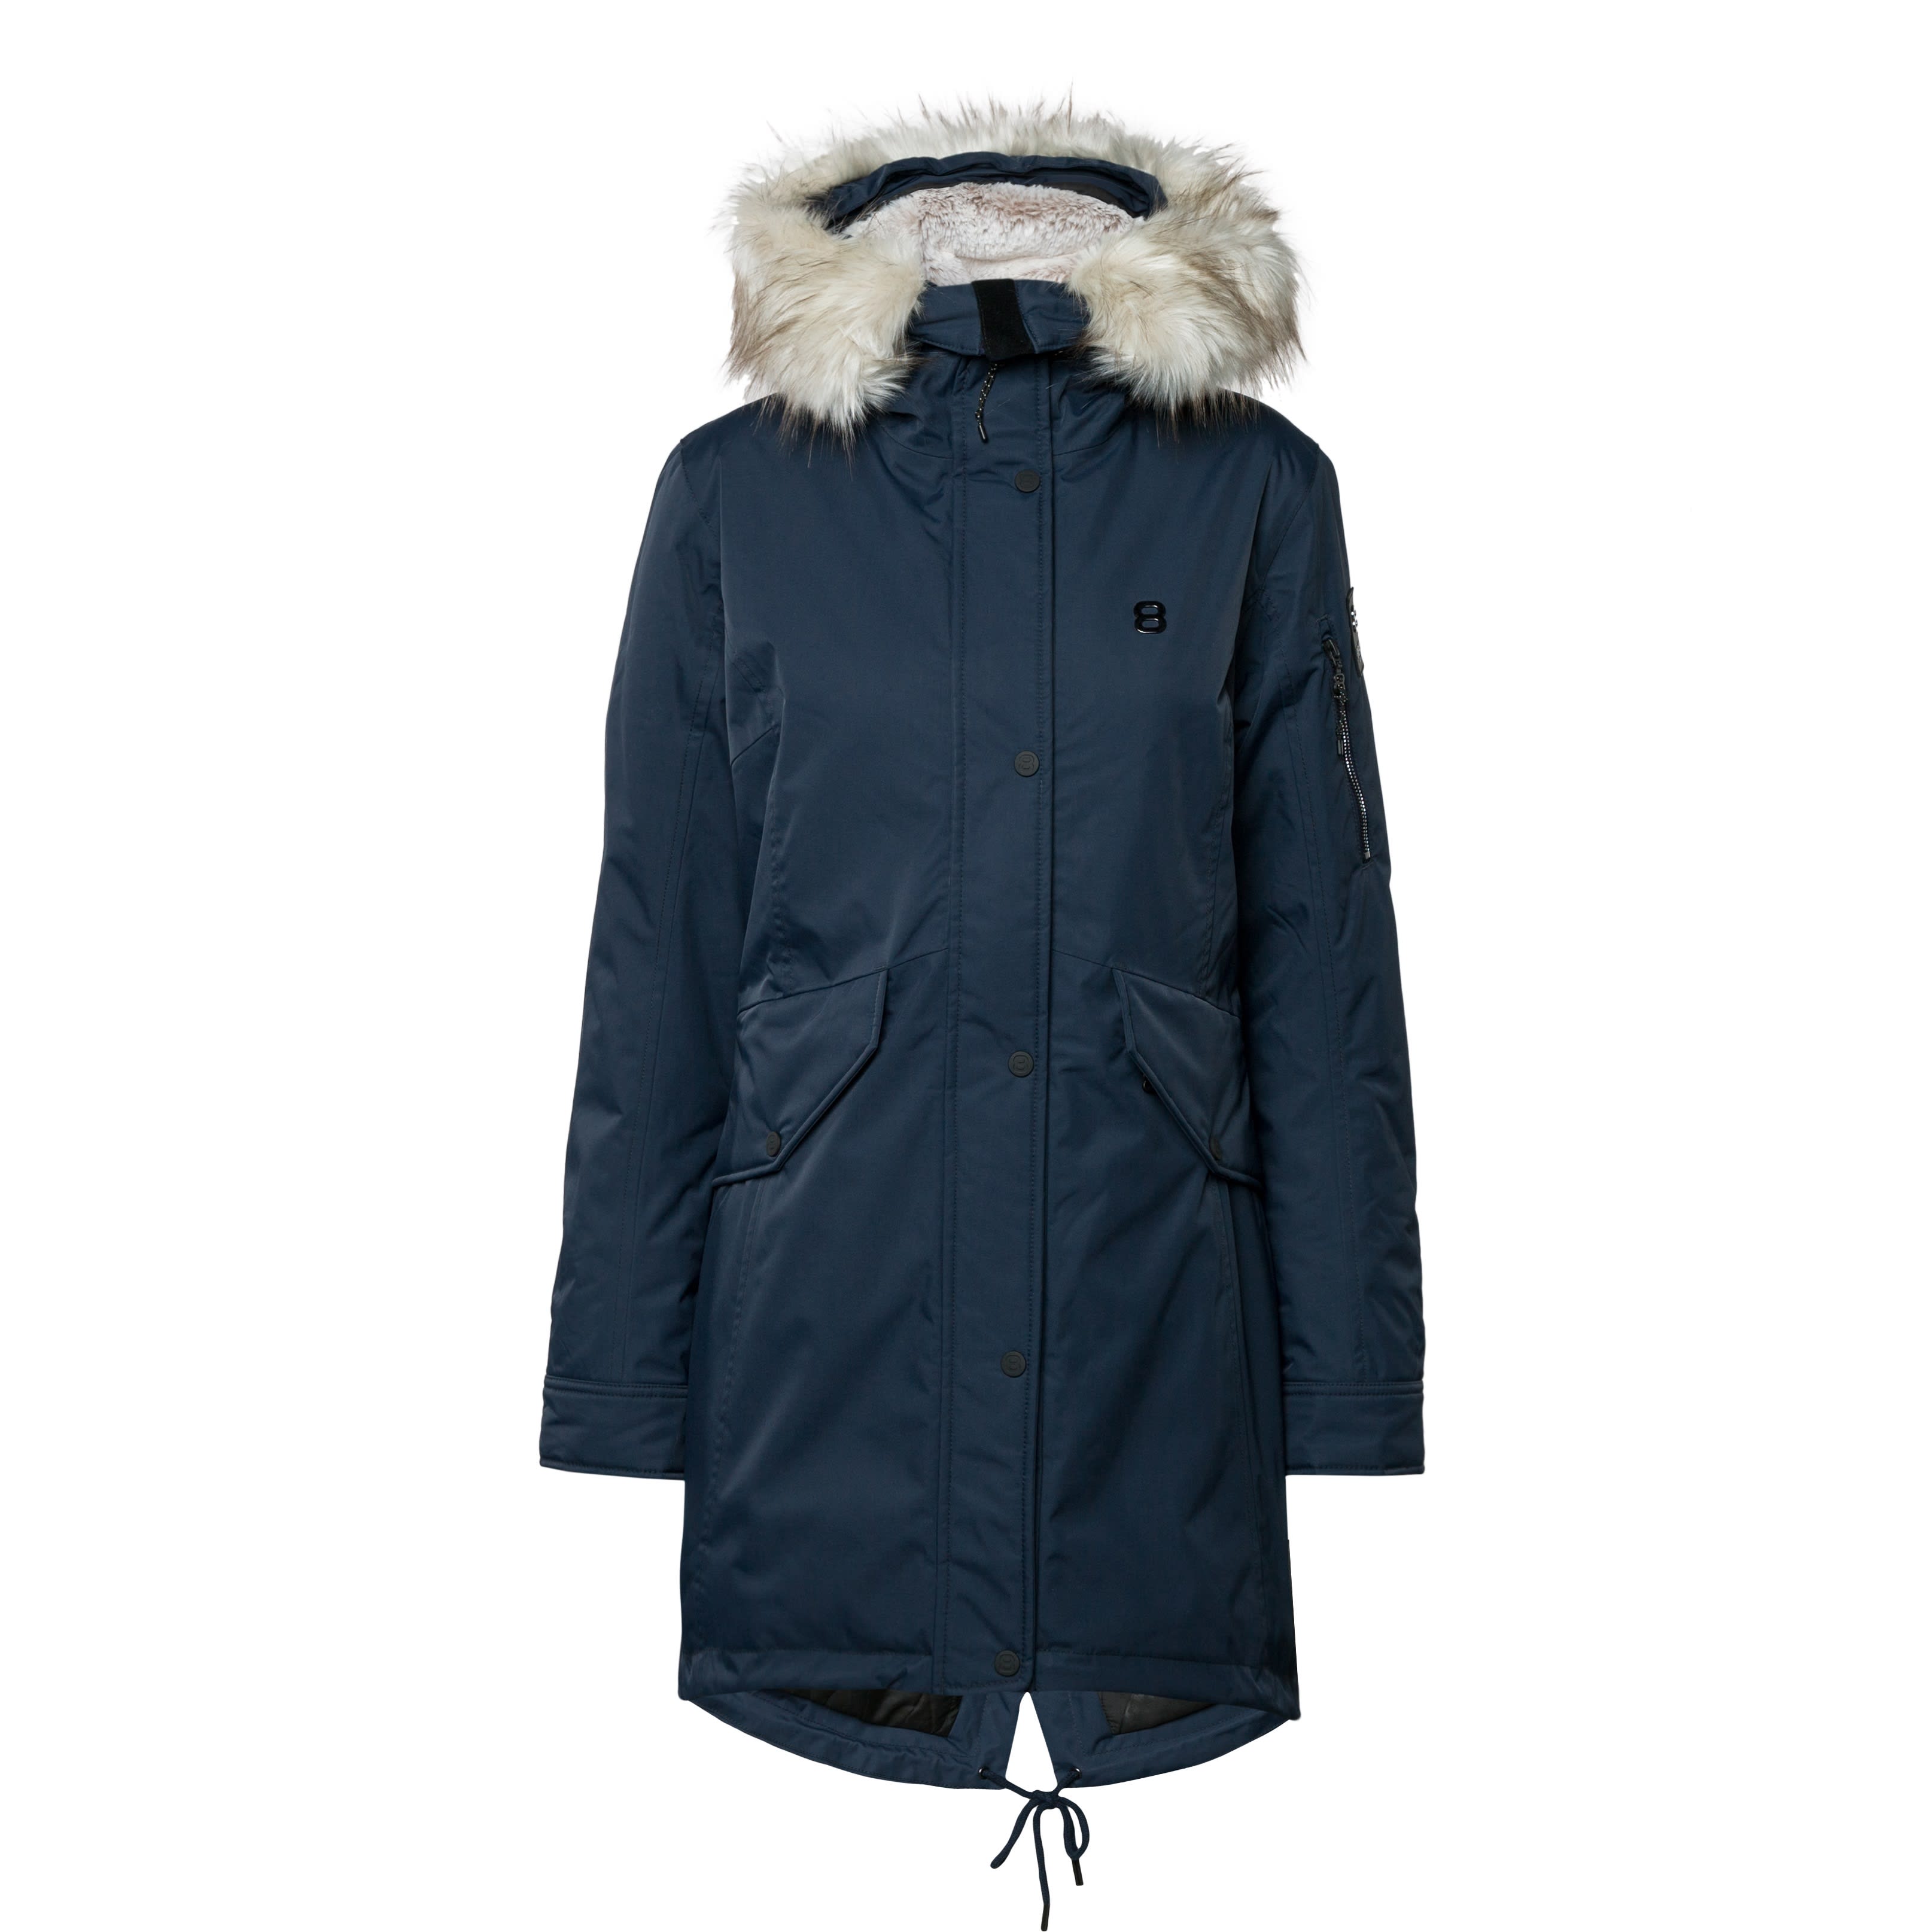 8848 Altitude Women's Parka from Outnorth